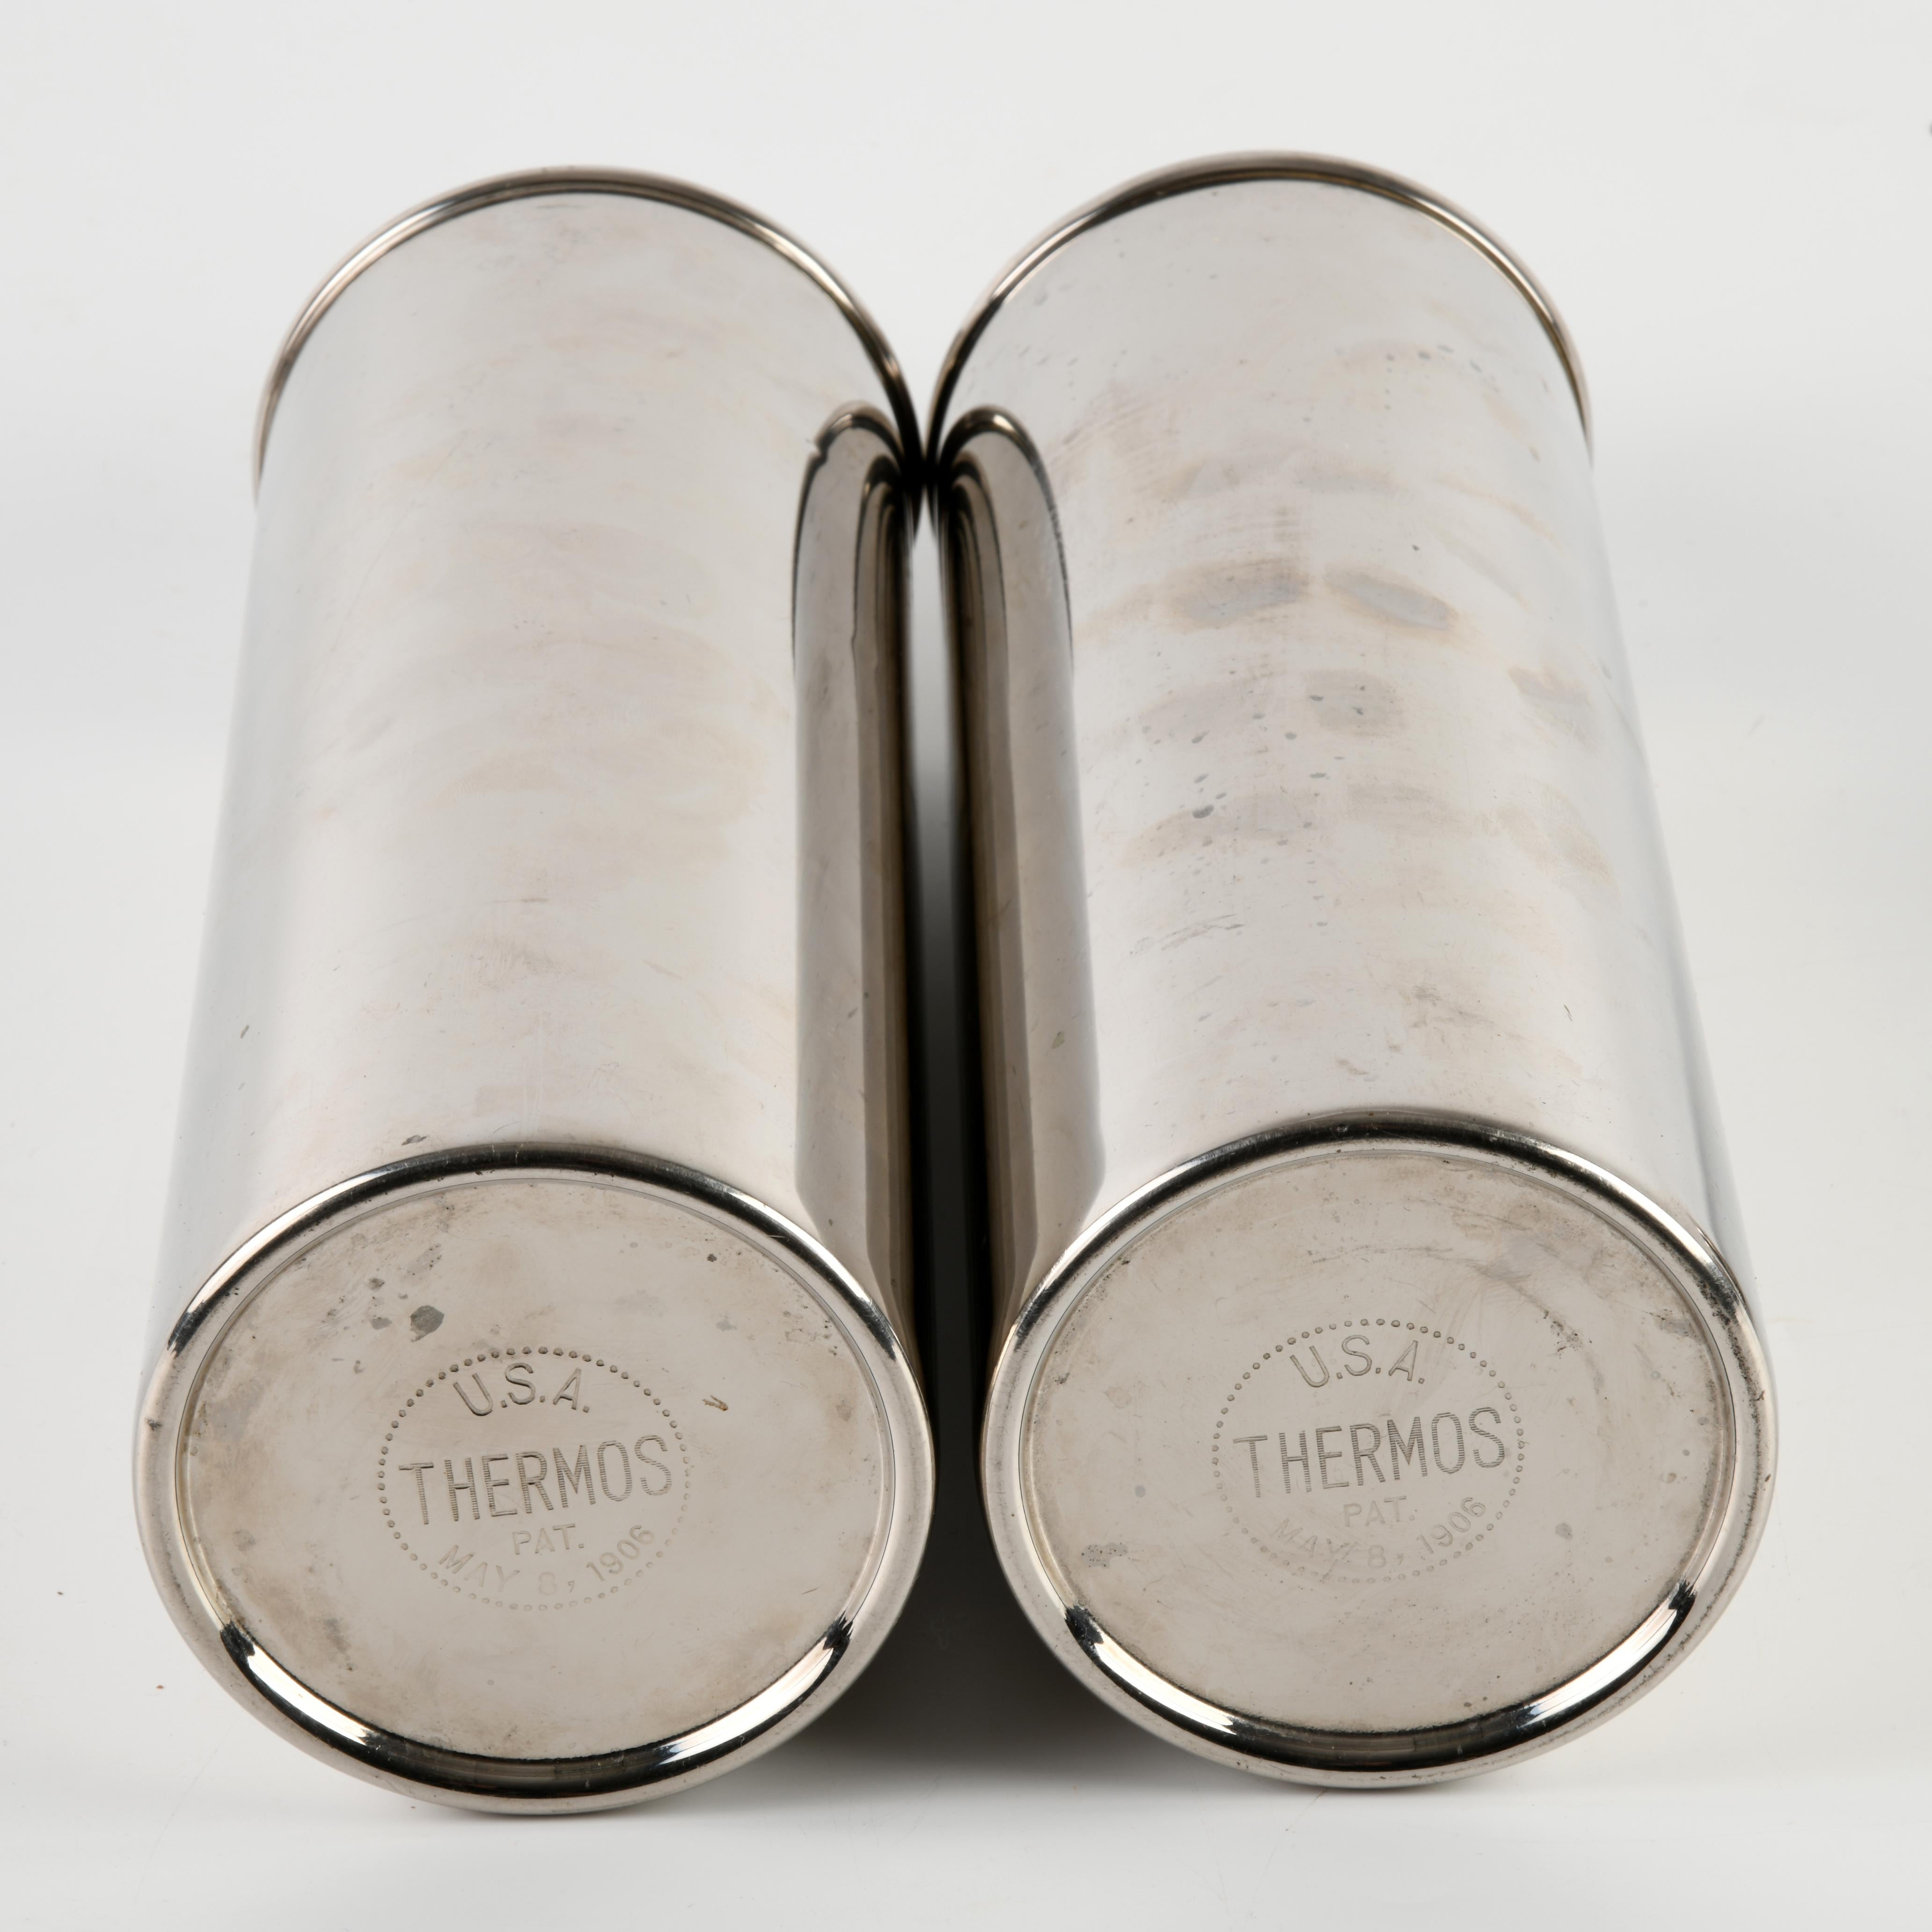 American Set of two chrome-plated steel Thermos flasks, in a velvet-lined leather case